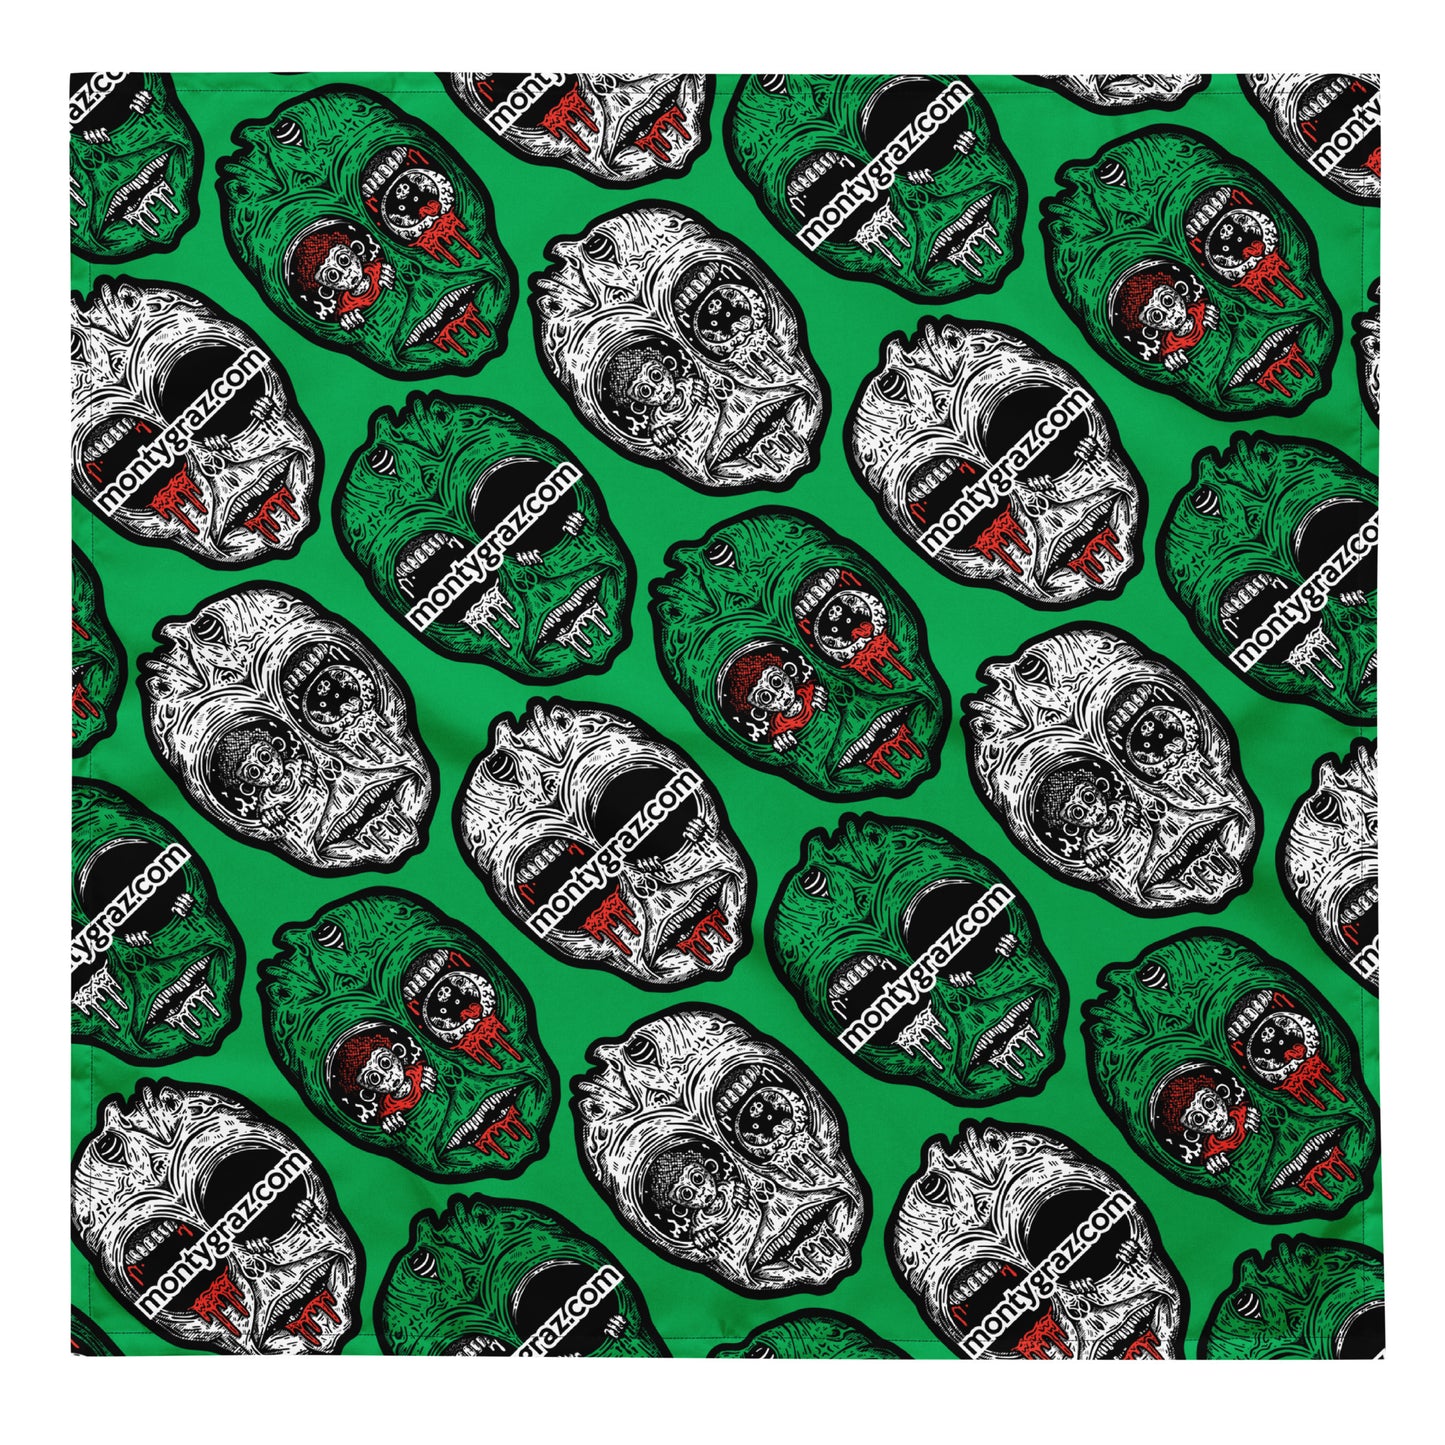 Zed Sees All Repeater Bandana - Green